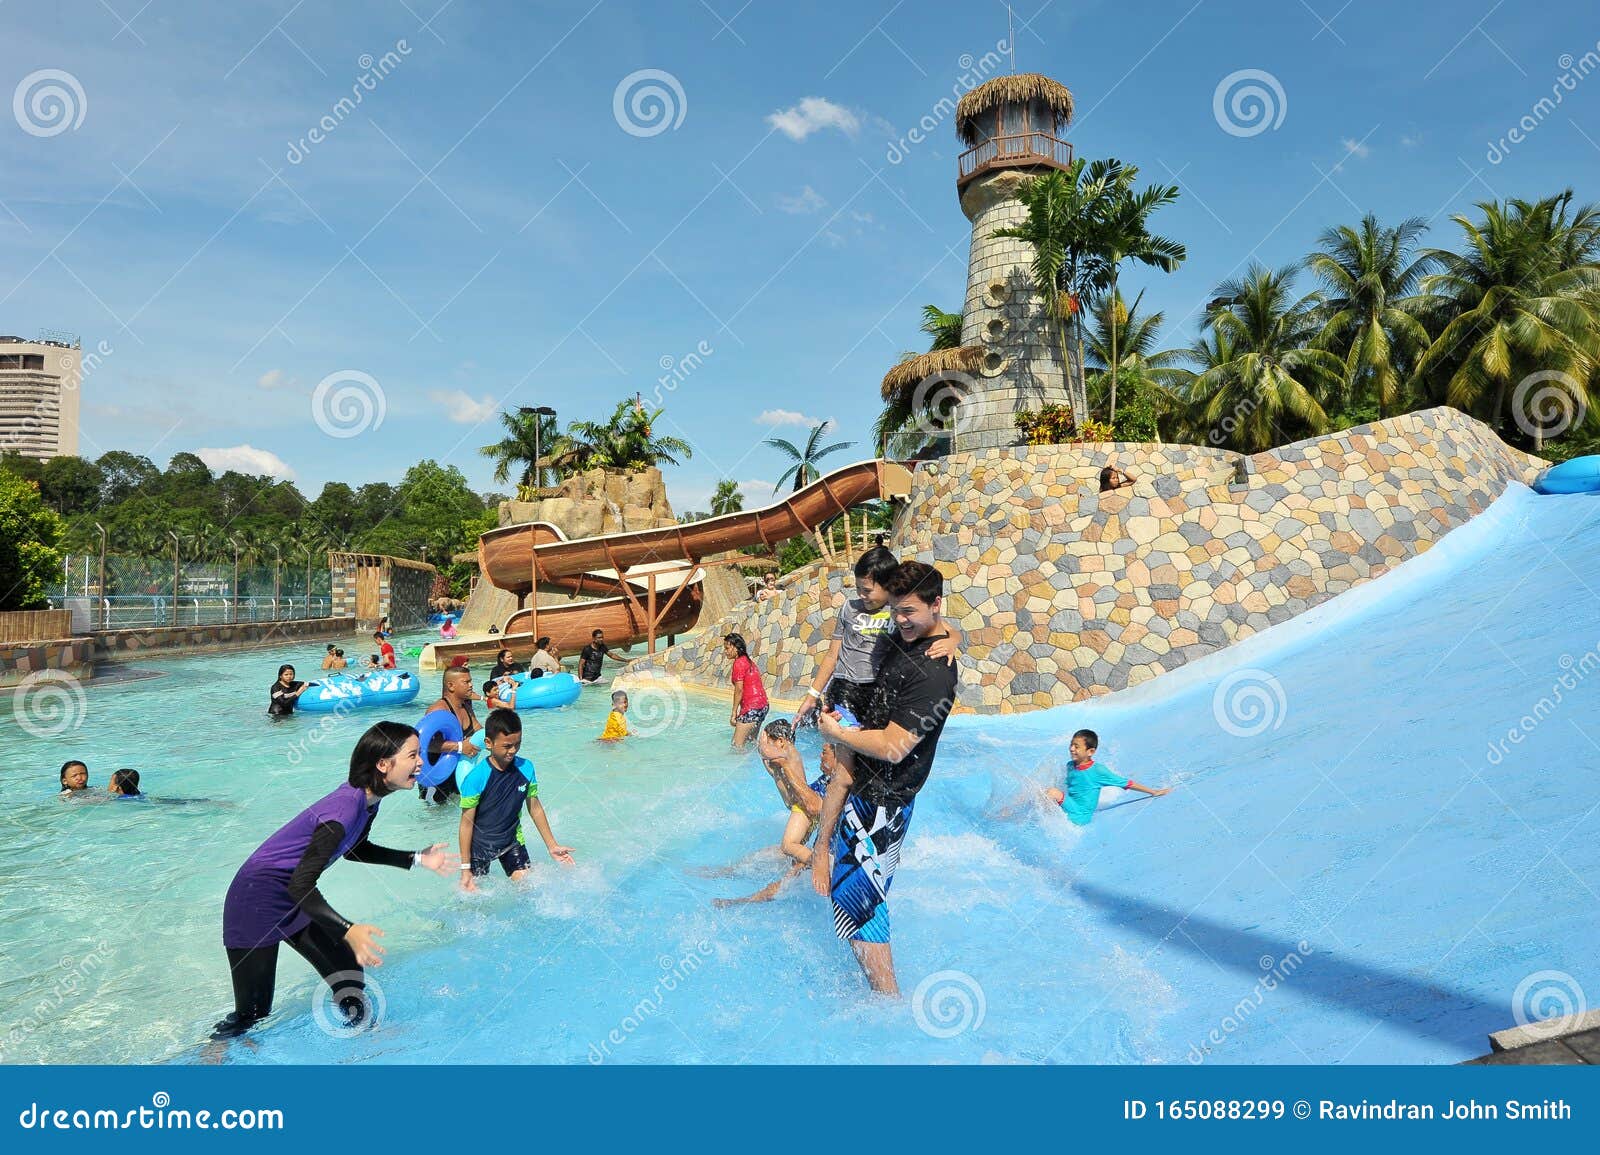 Wet World Water Park Shah Alam Editorial Stock Image  Image of shah